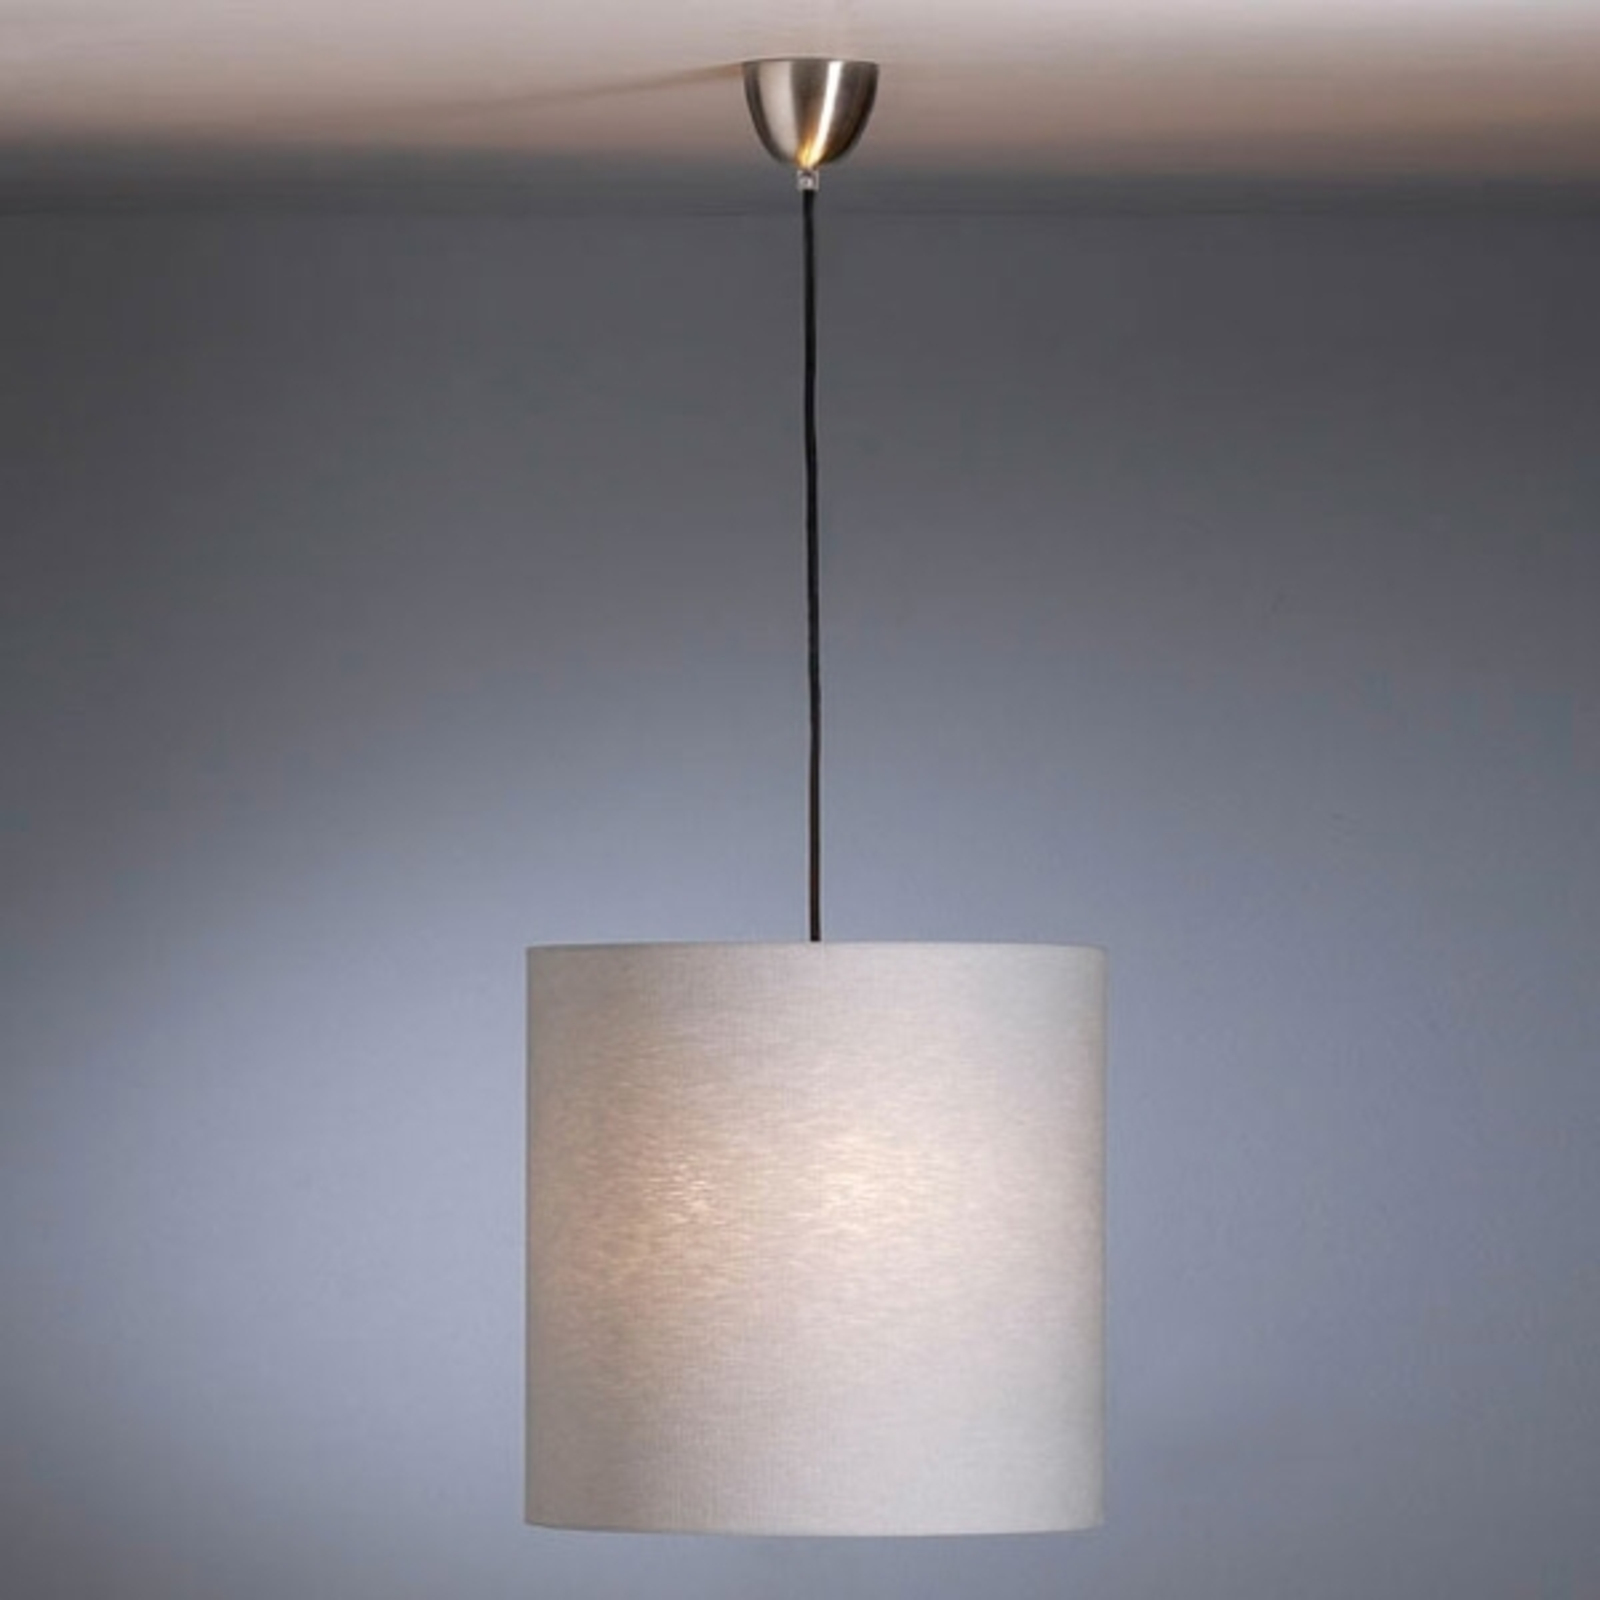 Pendant light by Schnepel, natural, linen